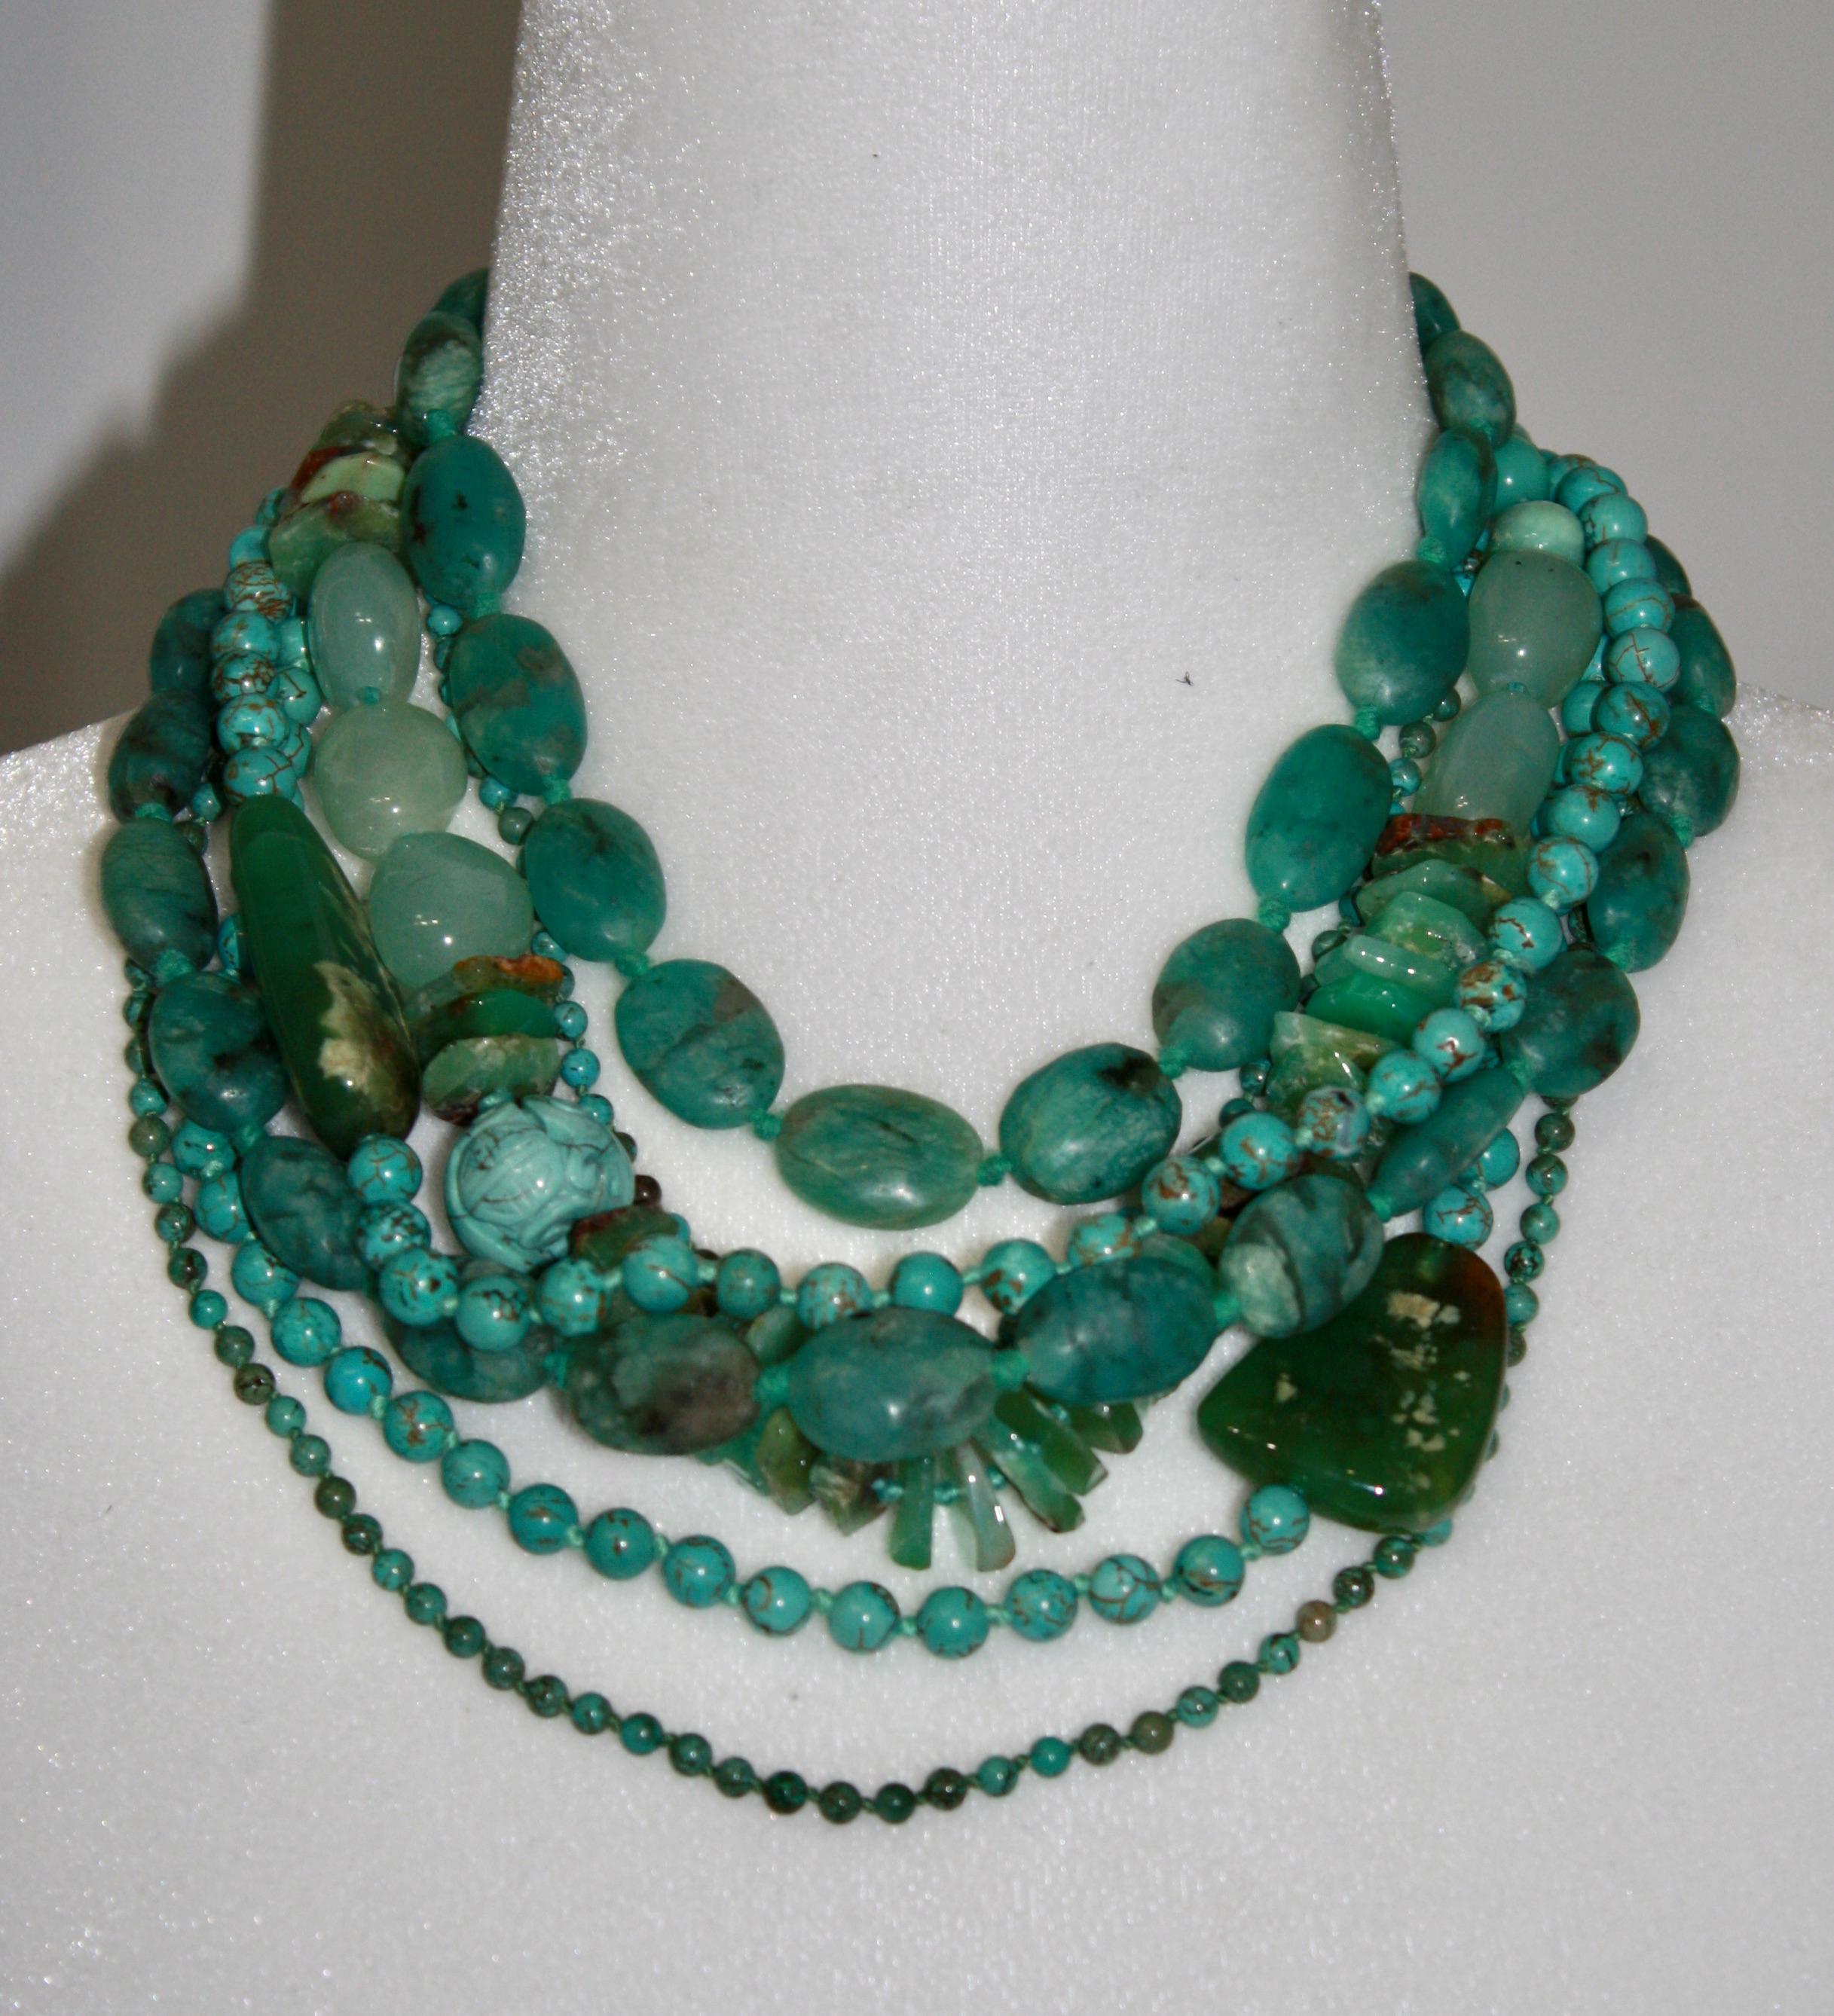 7 strands of semi precious stones in shades of green create this unique creation by Monies. Another example of their exceptional work.